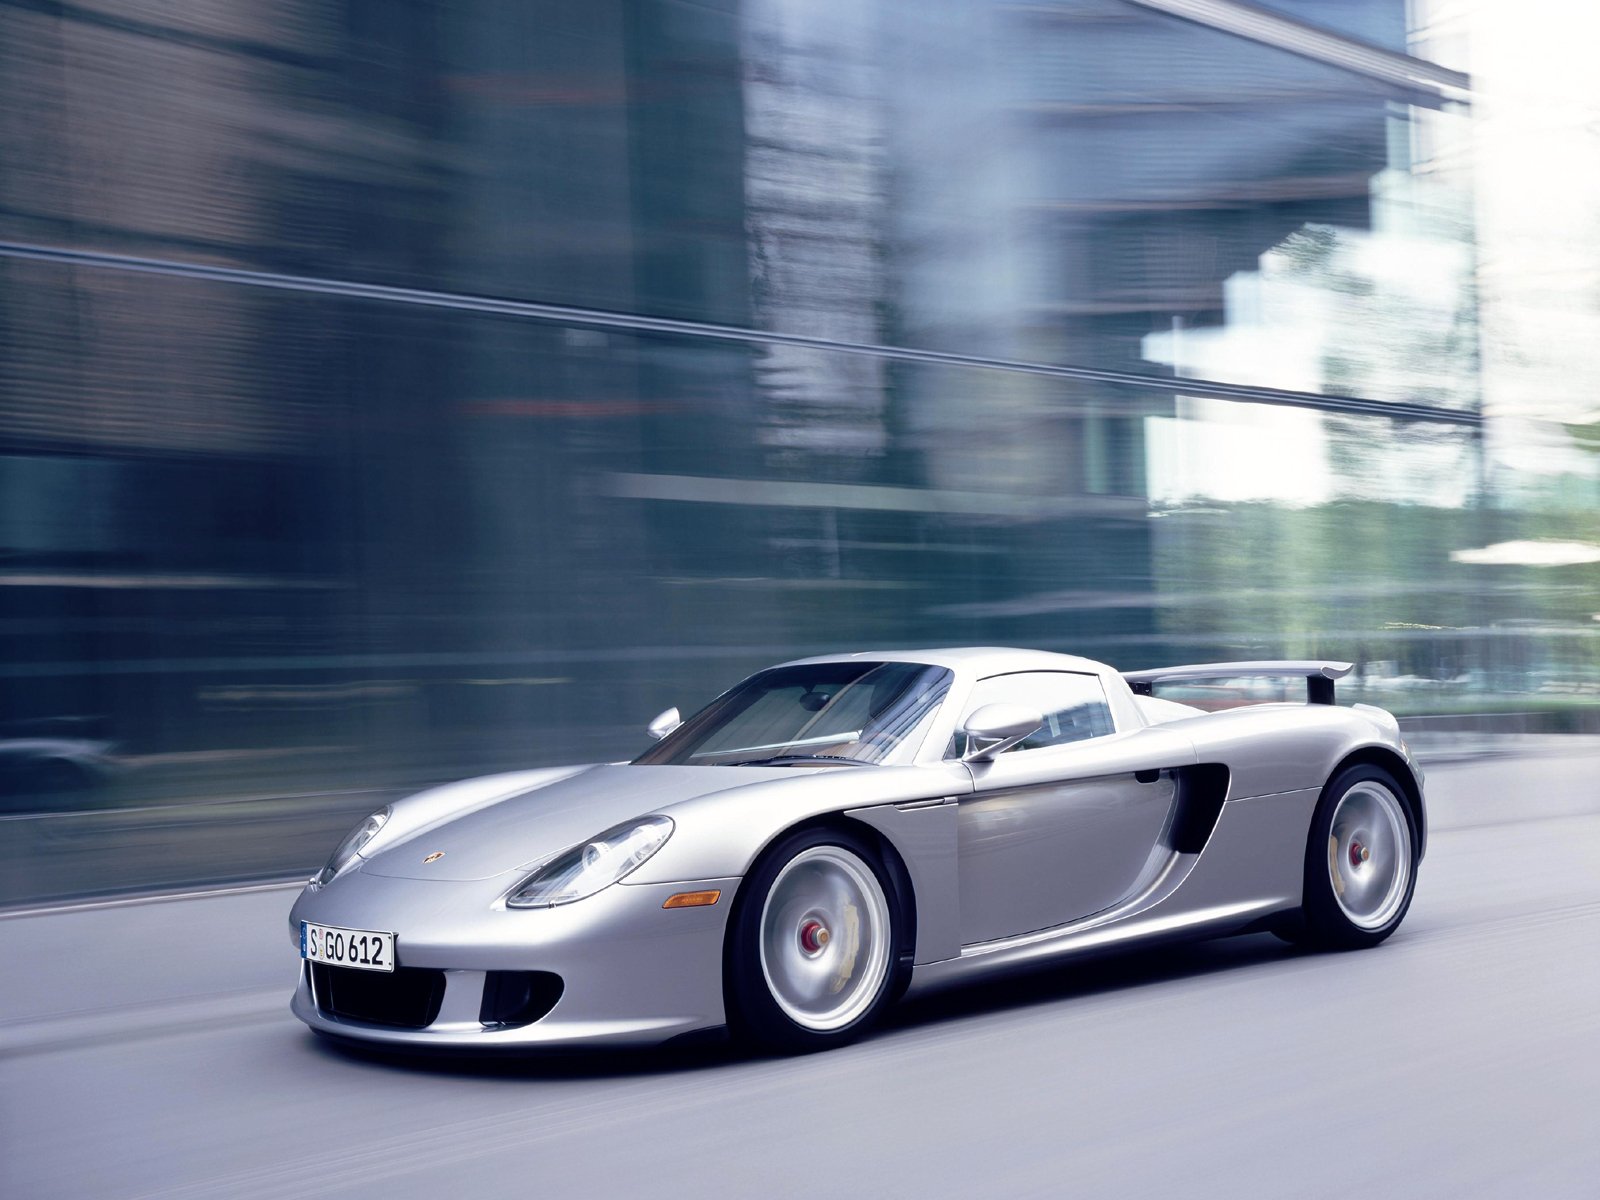 You can vote for this Porsche Carrera GT photo